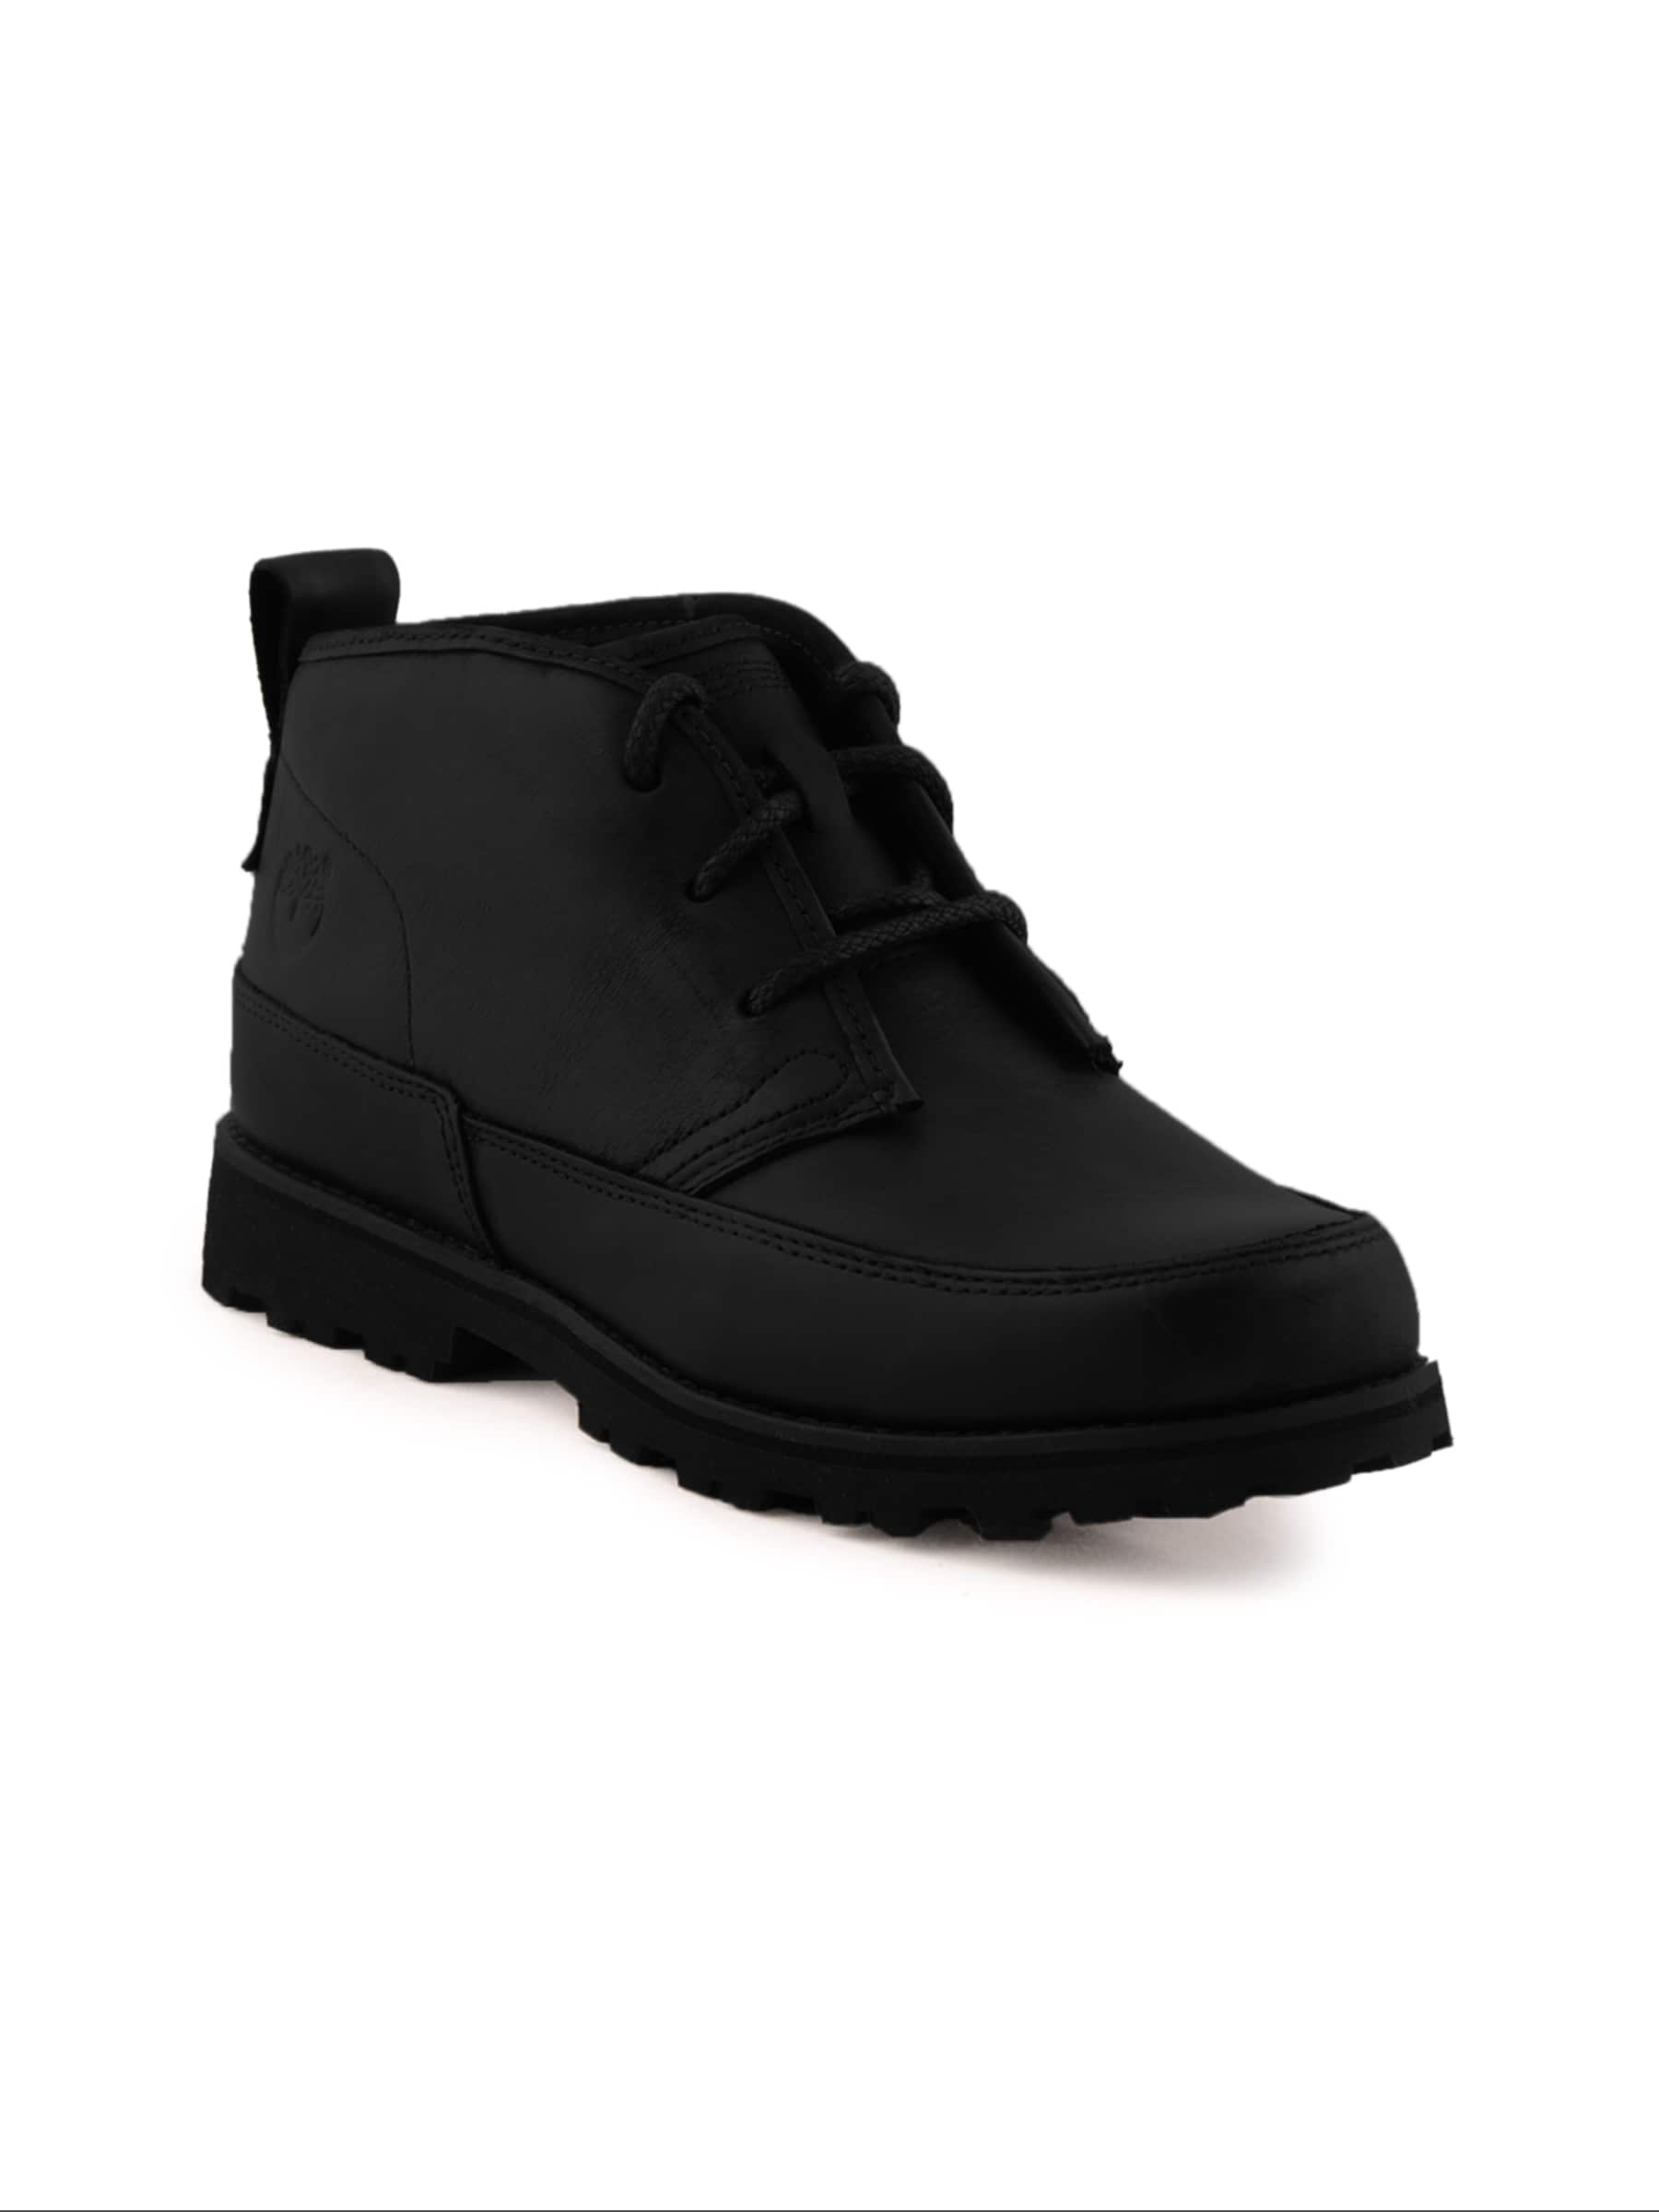 Timberland Kids Boys Casual Black Casual Shoes